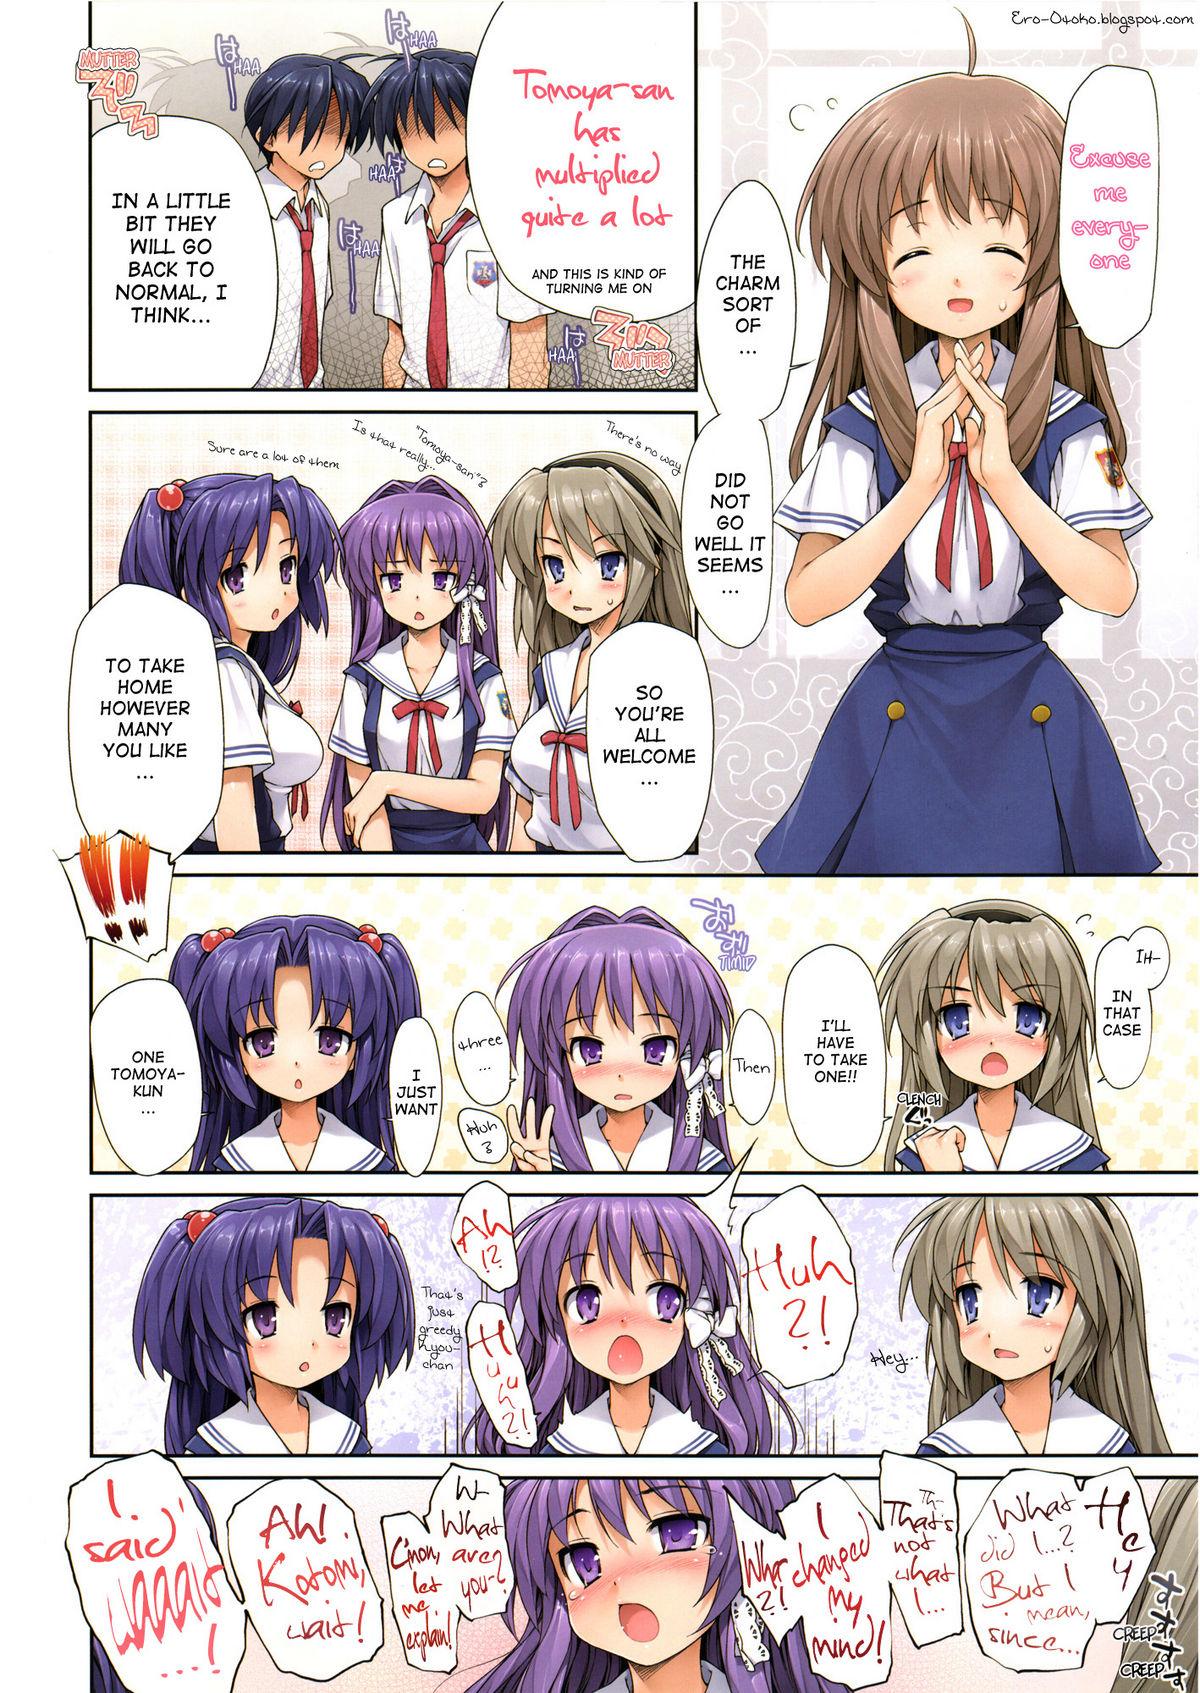 Banging OKAZ - Clannad Orgy - Page 3